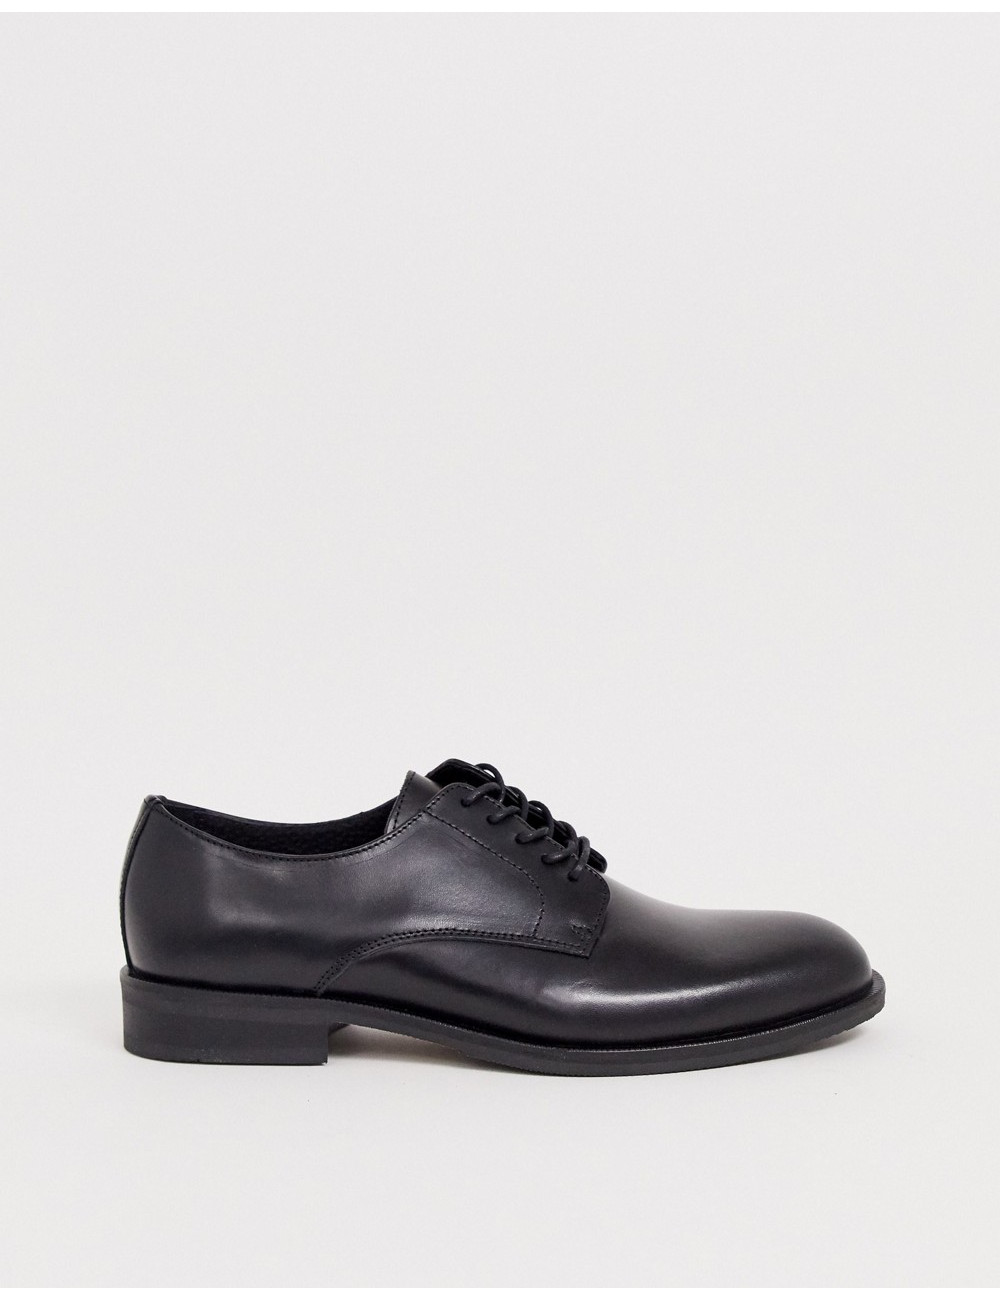 Selected Homme derby shoe...